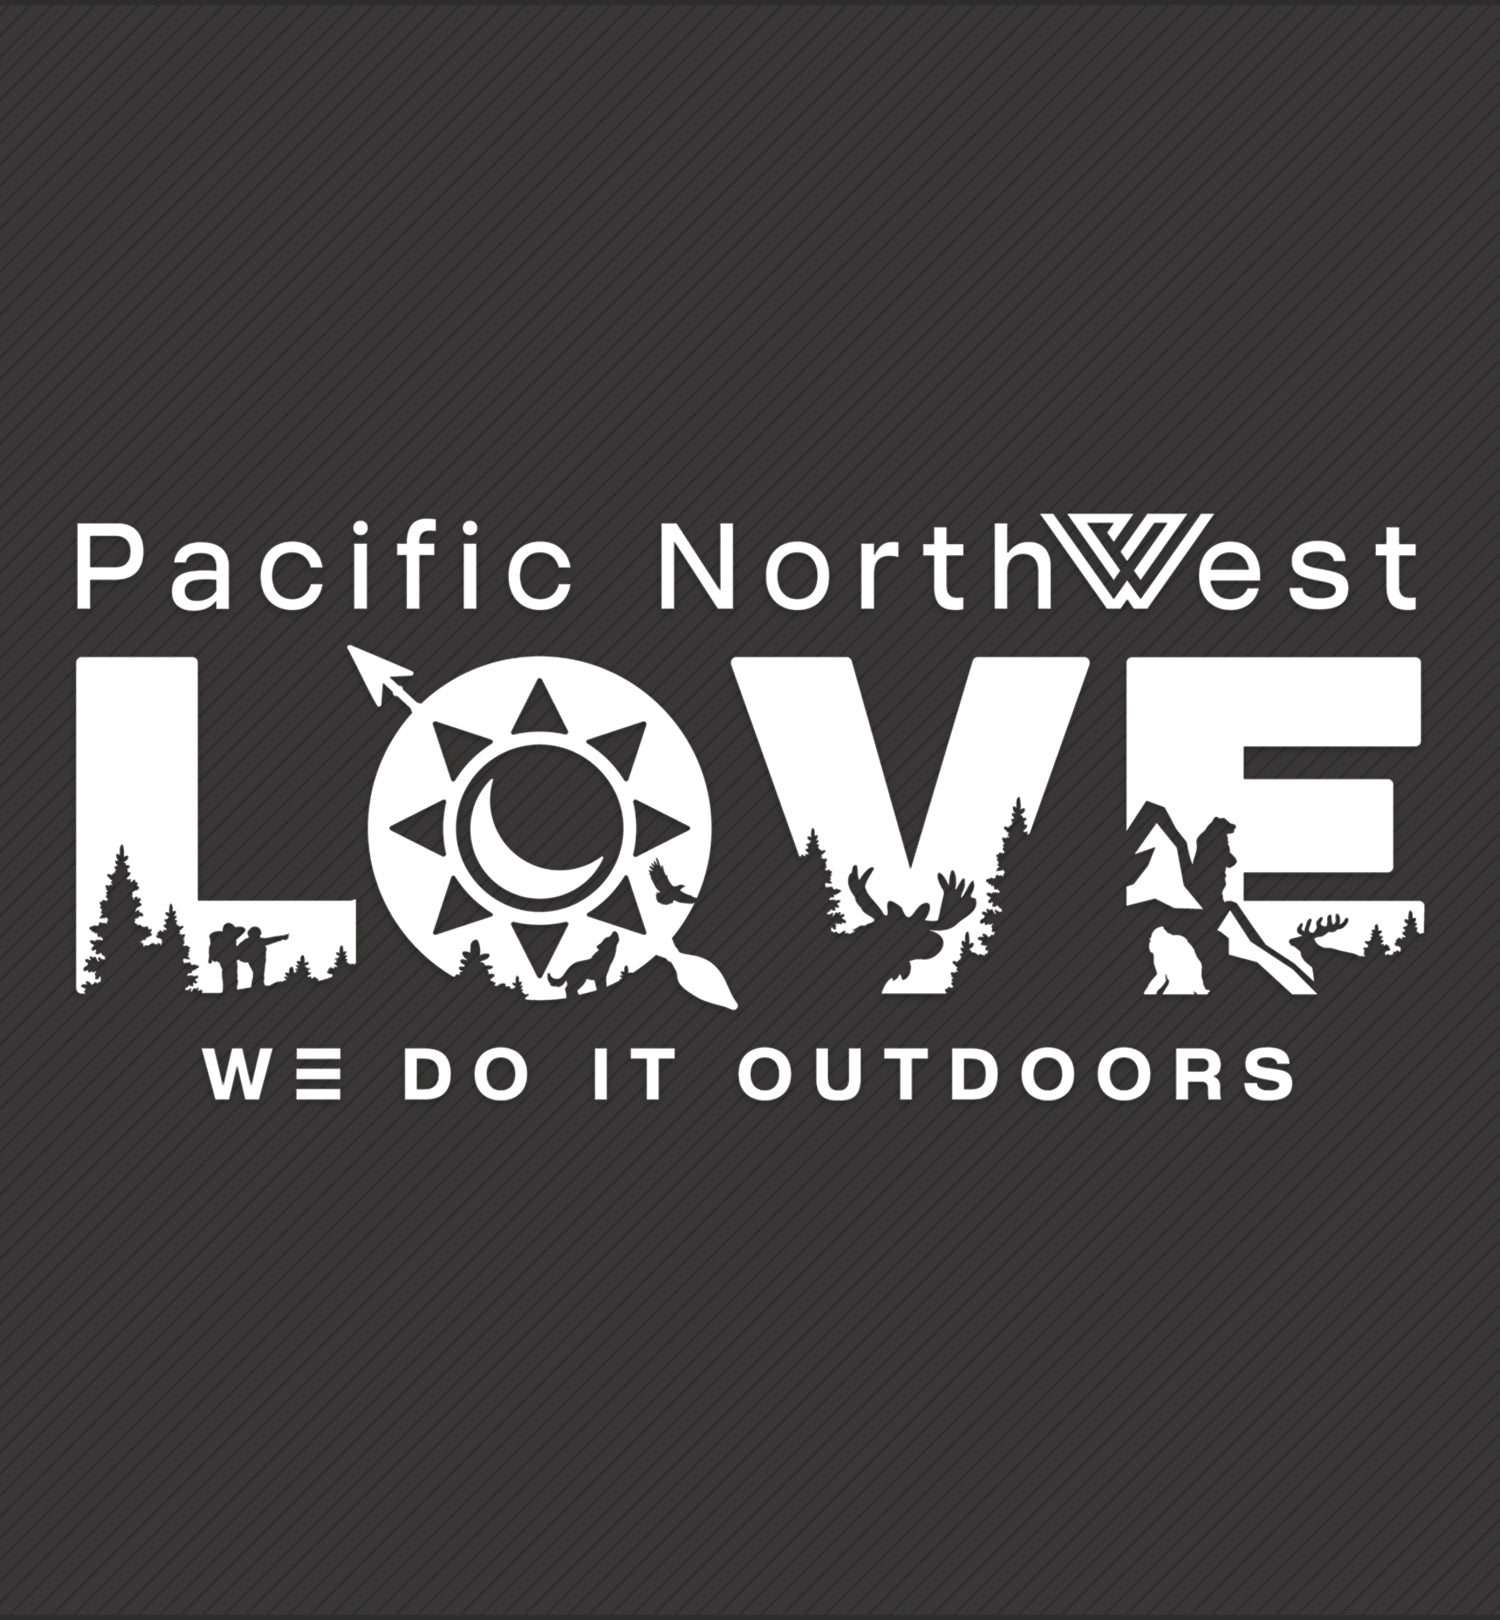 Pacific Northwest LOVE Decal